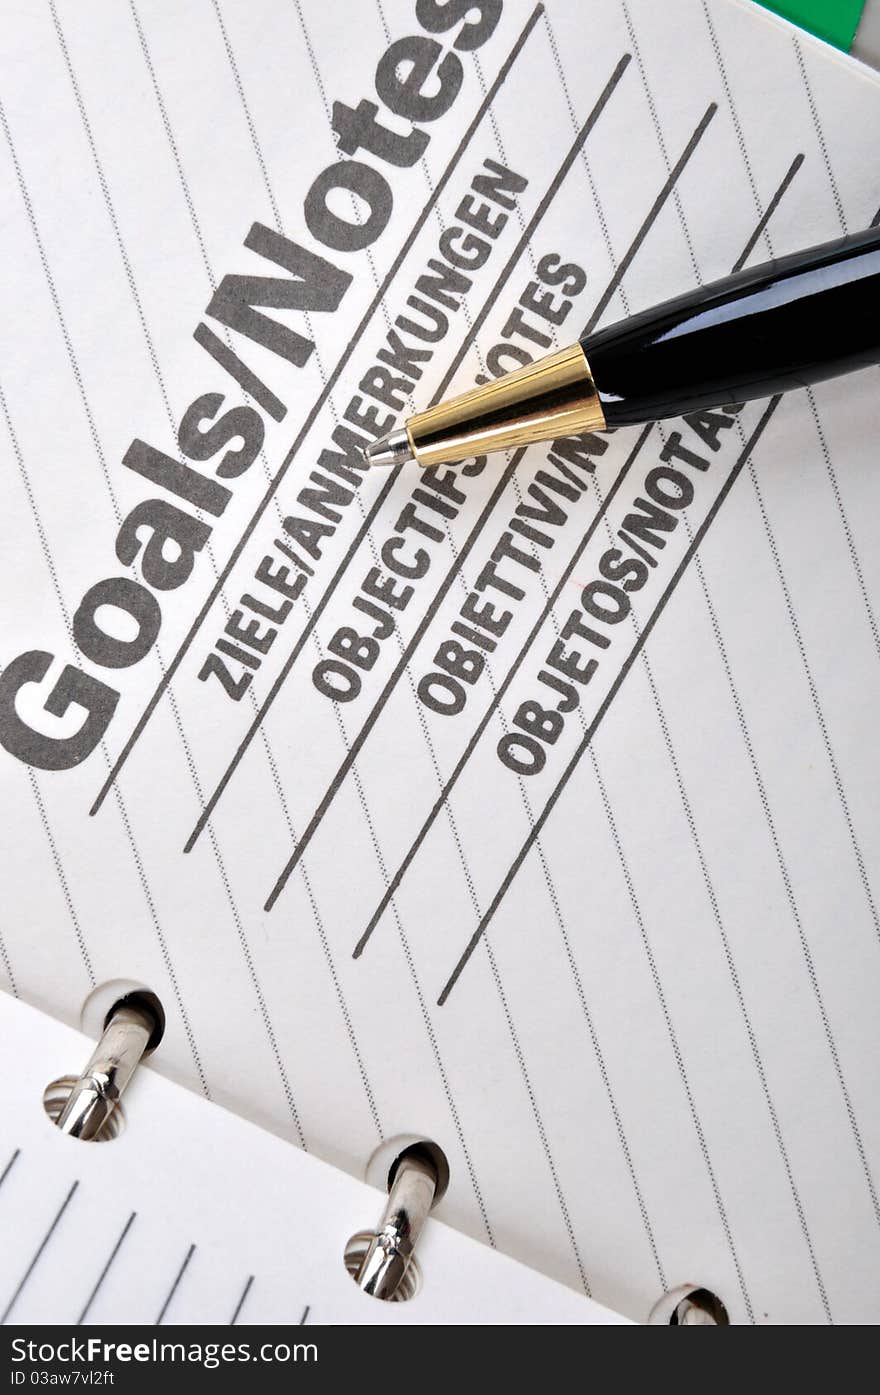 Goals plan or record in notepad and a ball pen, shown as working goals, target, focus, objective important notes and other related business concept. Goals plan or record in notepad and a ball pen, shown as working goals, target, focus, objective important notes and other related business concept.